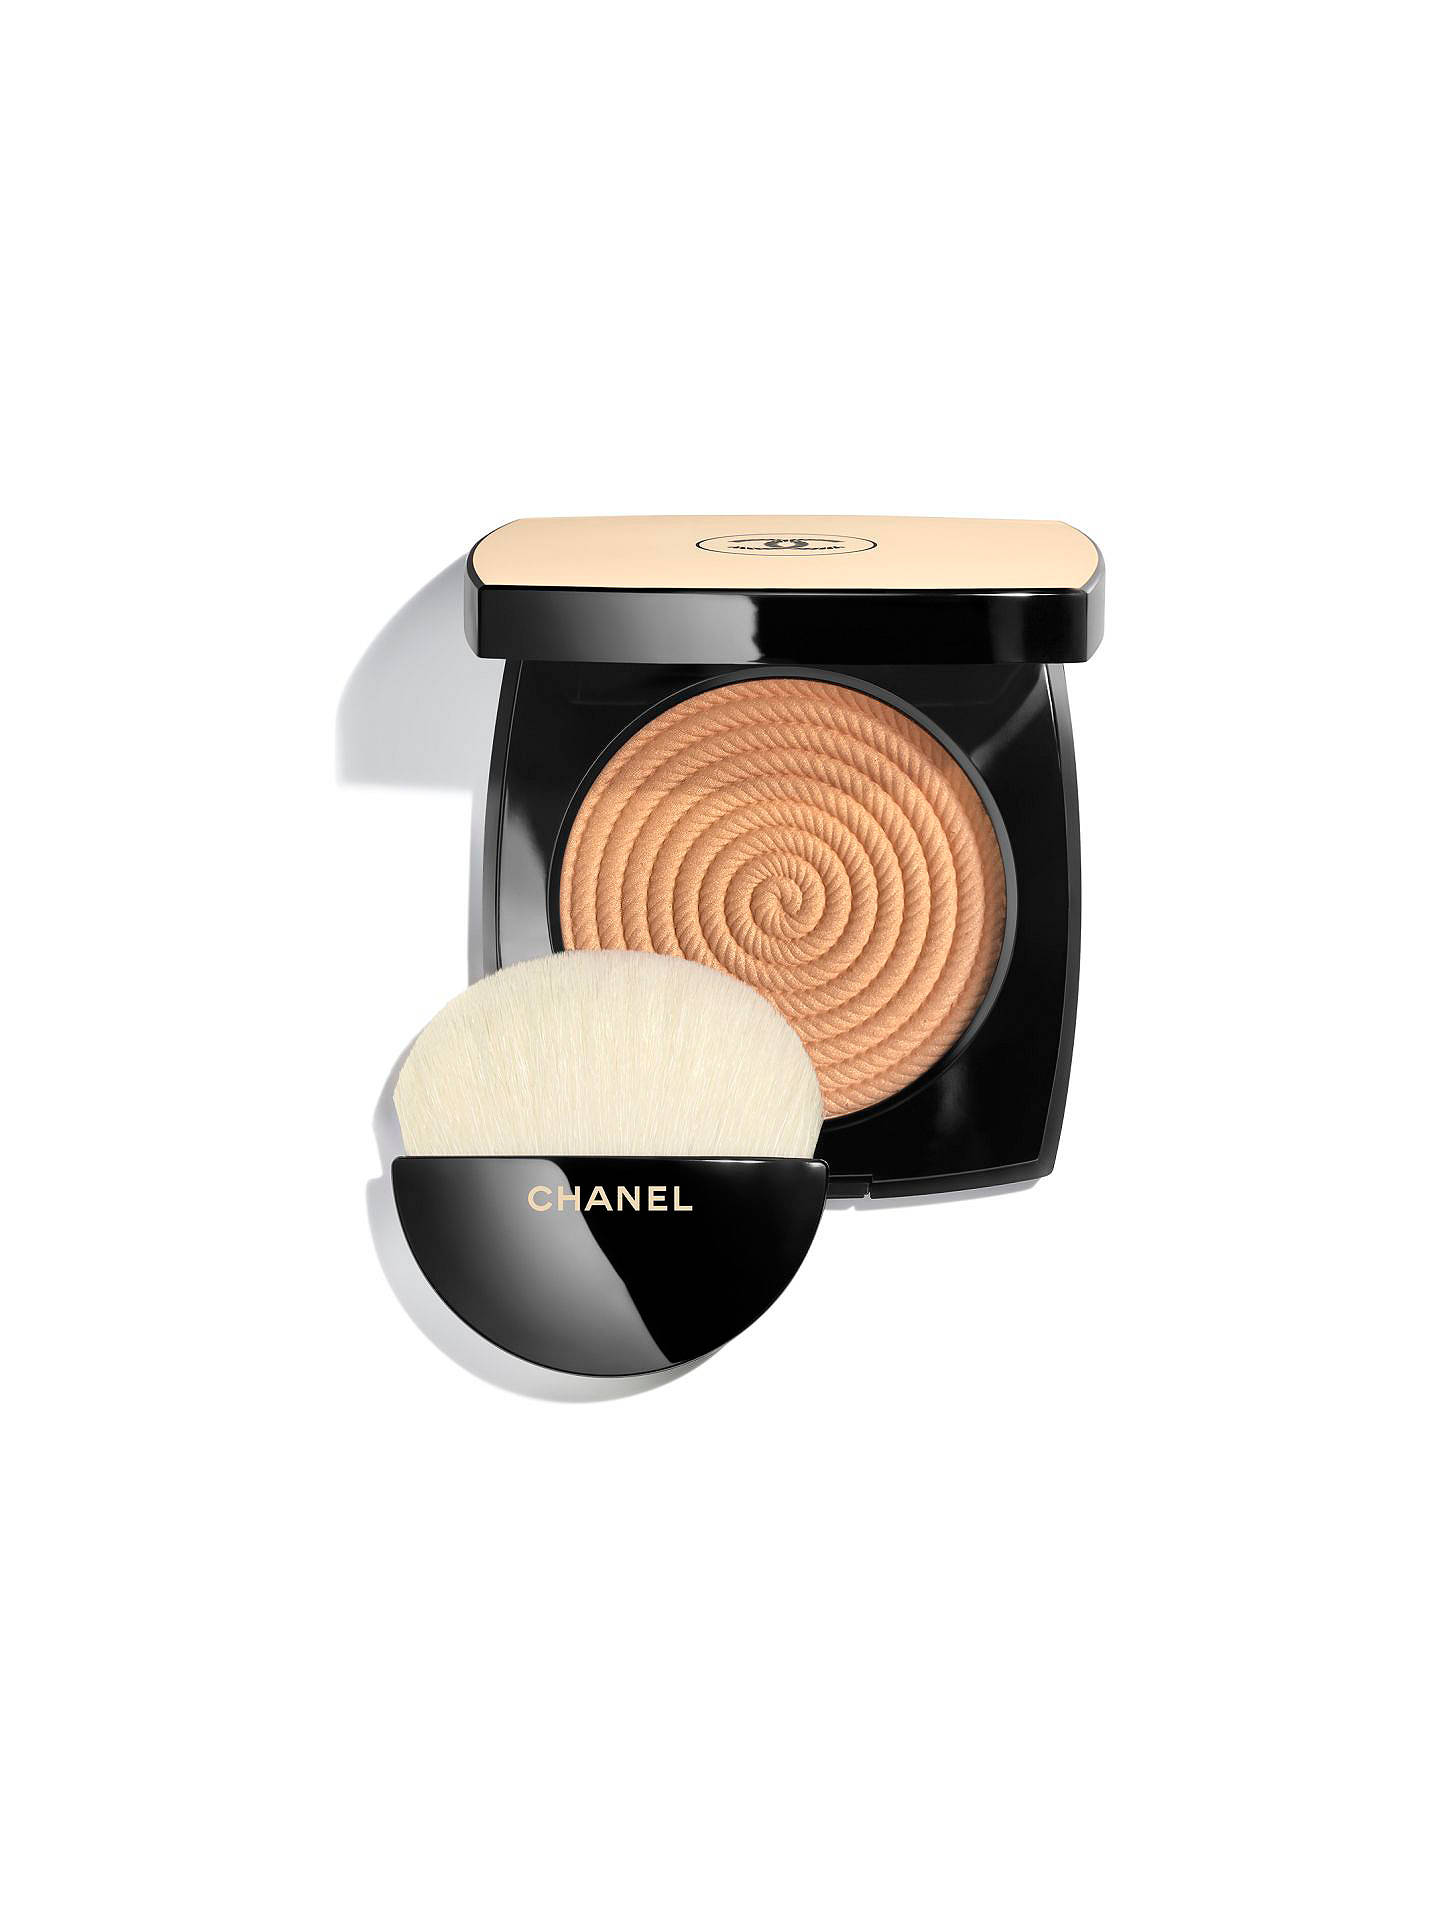 CHANEL Les Beiges Healthy Glow Illuminating Powder Exclusive Creation ...